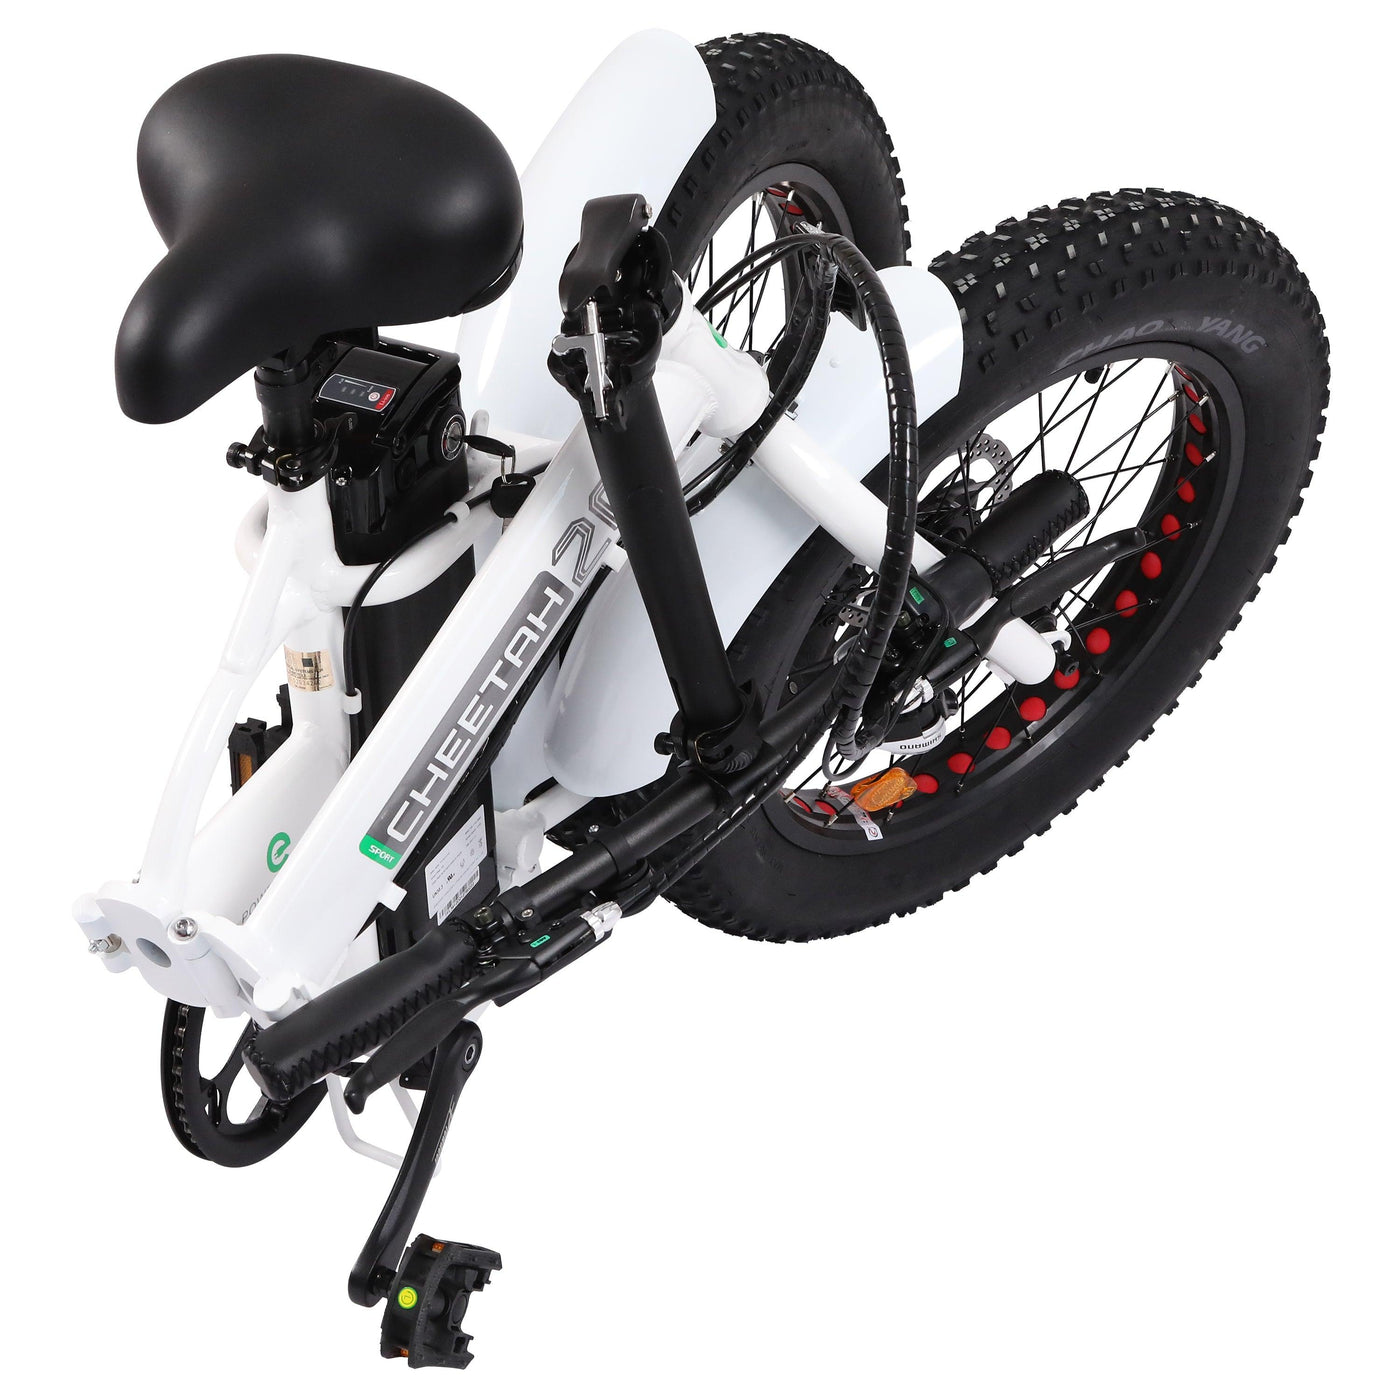 Ecotric 36V 12.5AH White Foldable Fat Tire Electric Bicycle Folded View